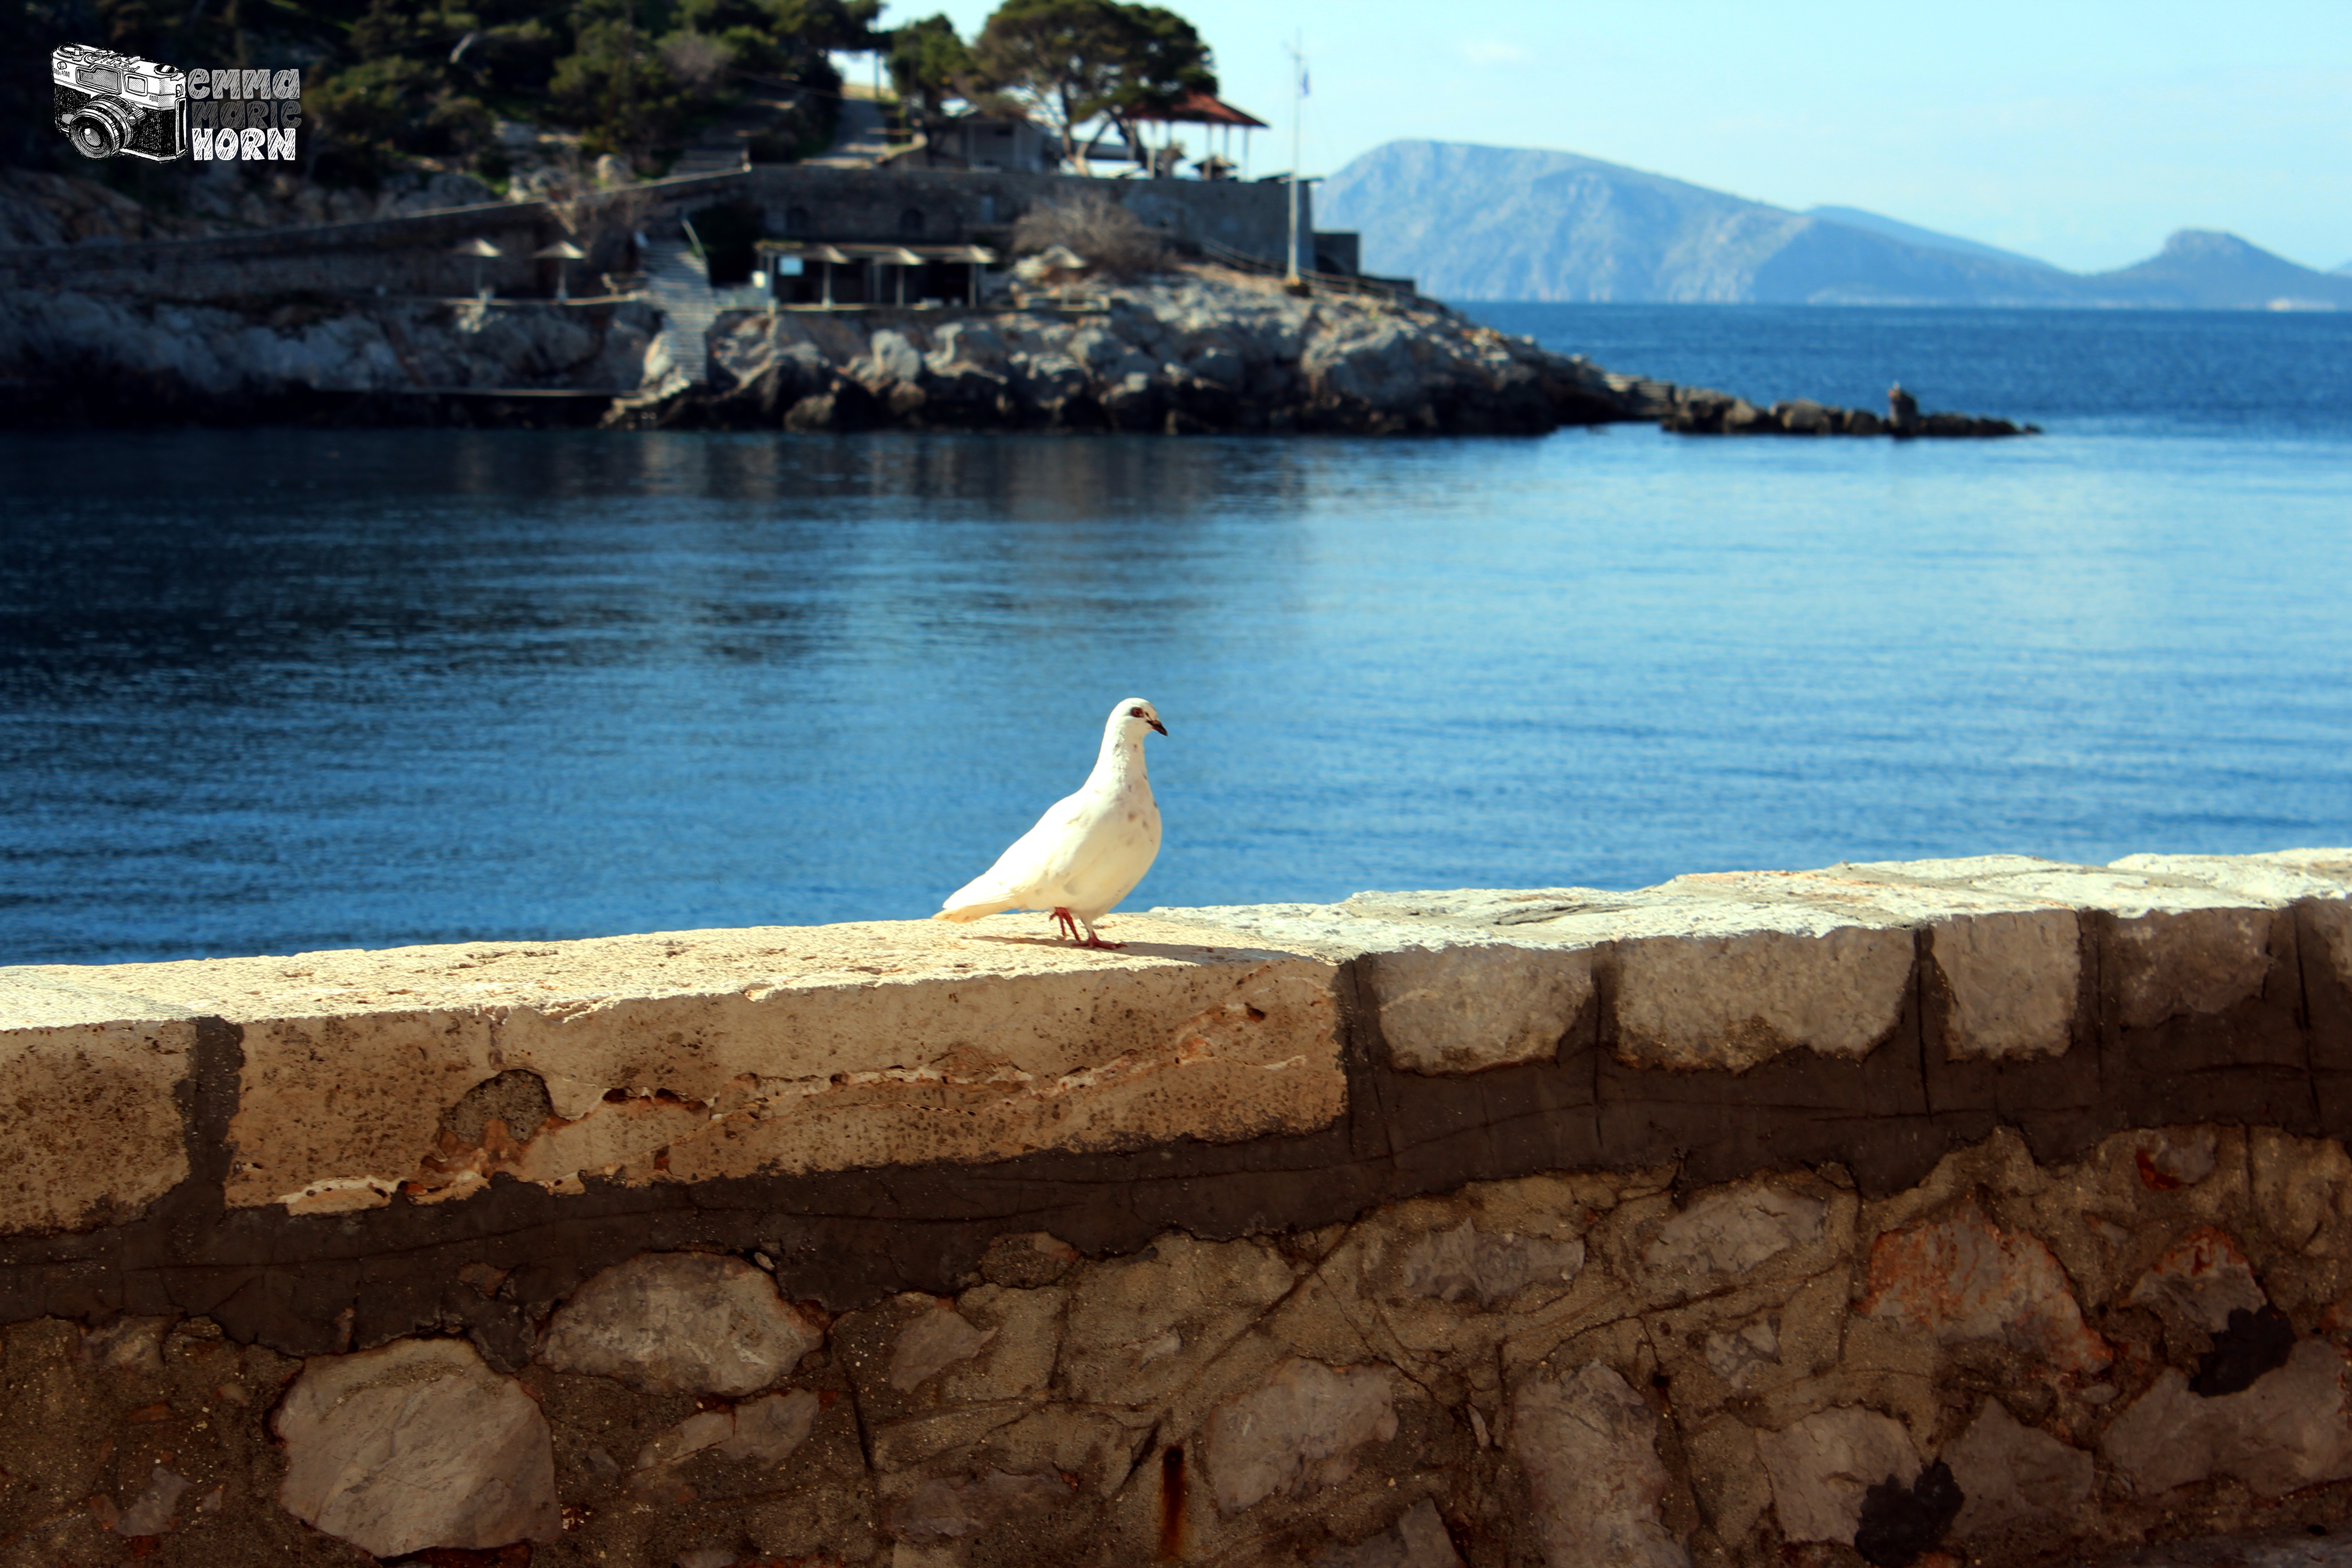 Emma Marie Horn Photography dove over the port of Aegina